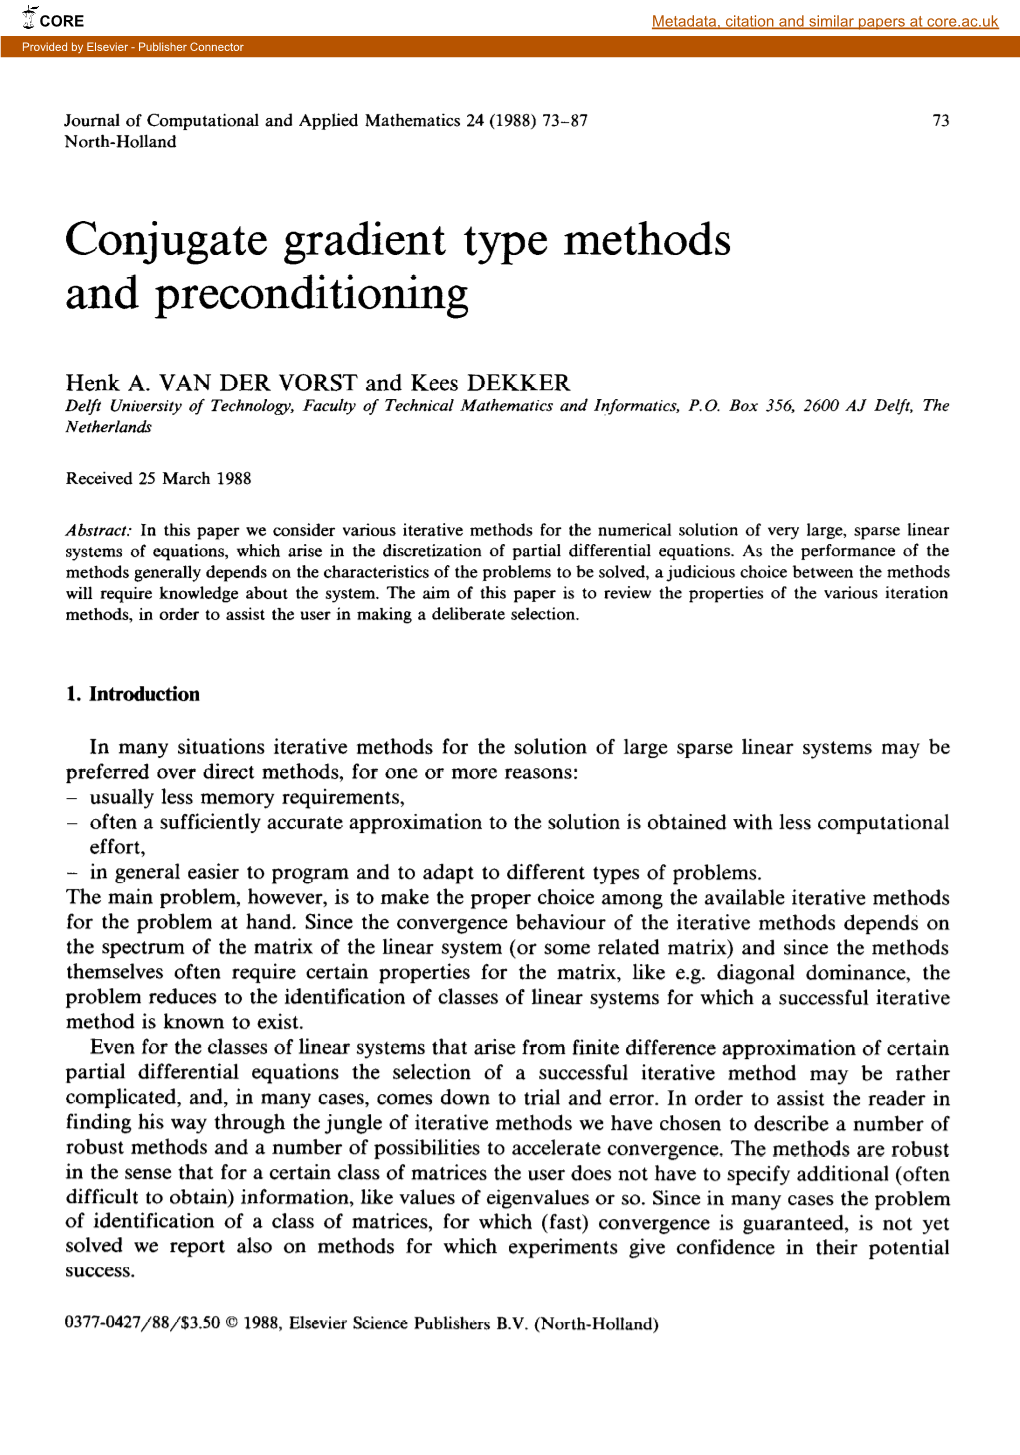 Conjugate Gradient Type Methods and Preconditioning